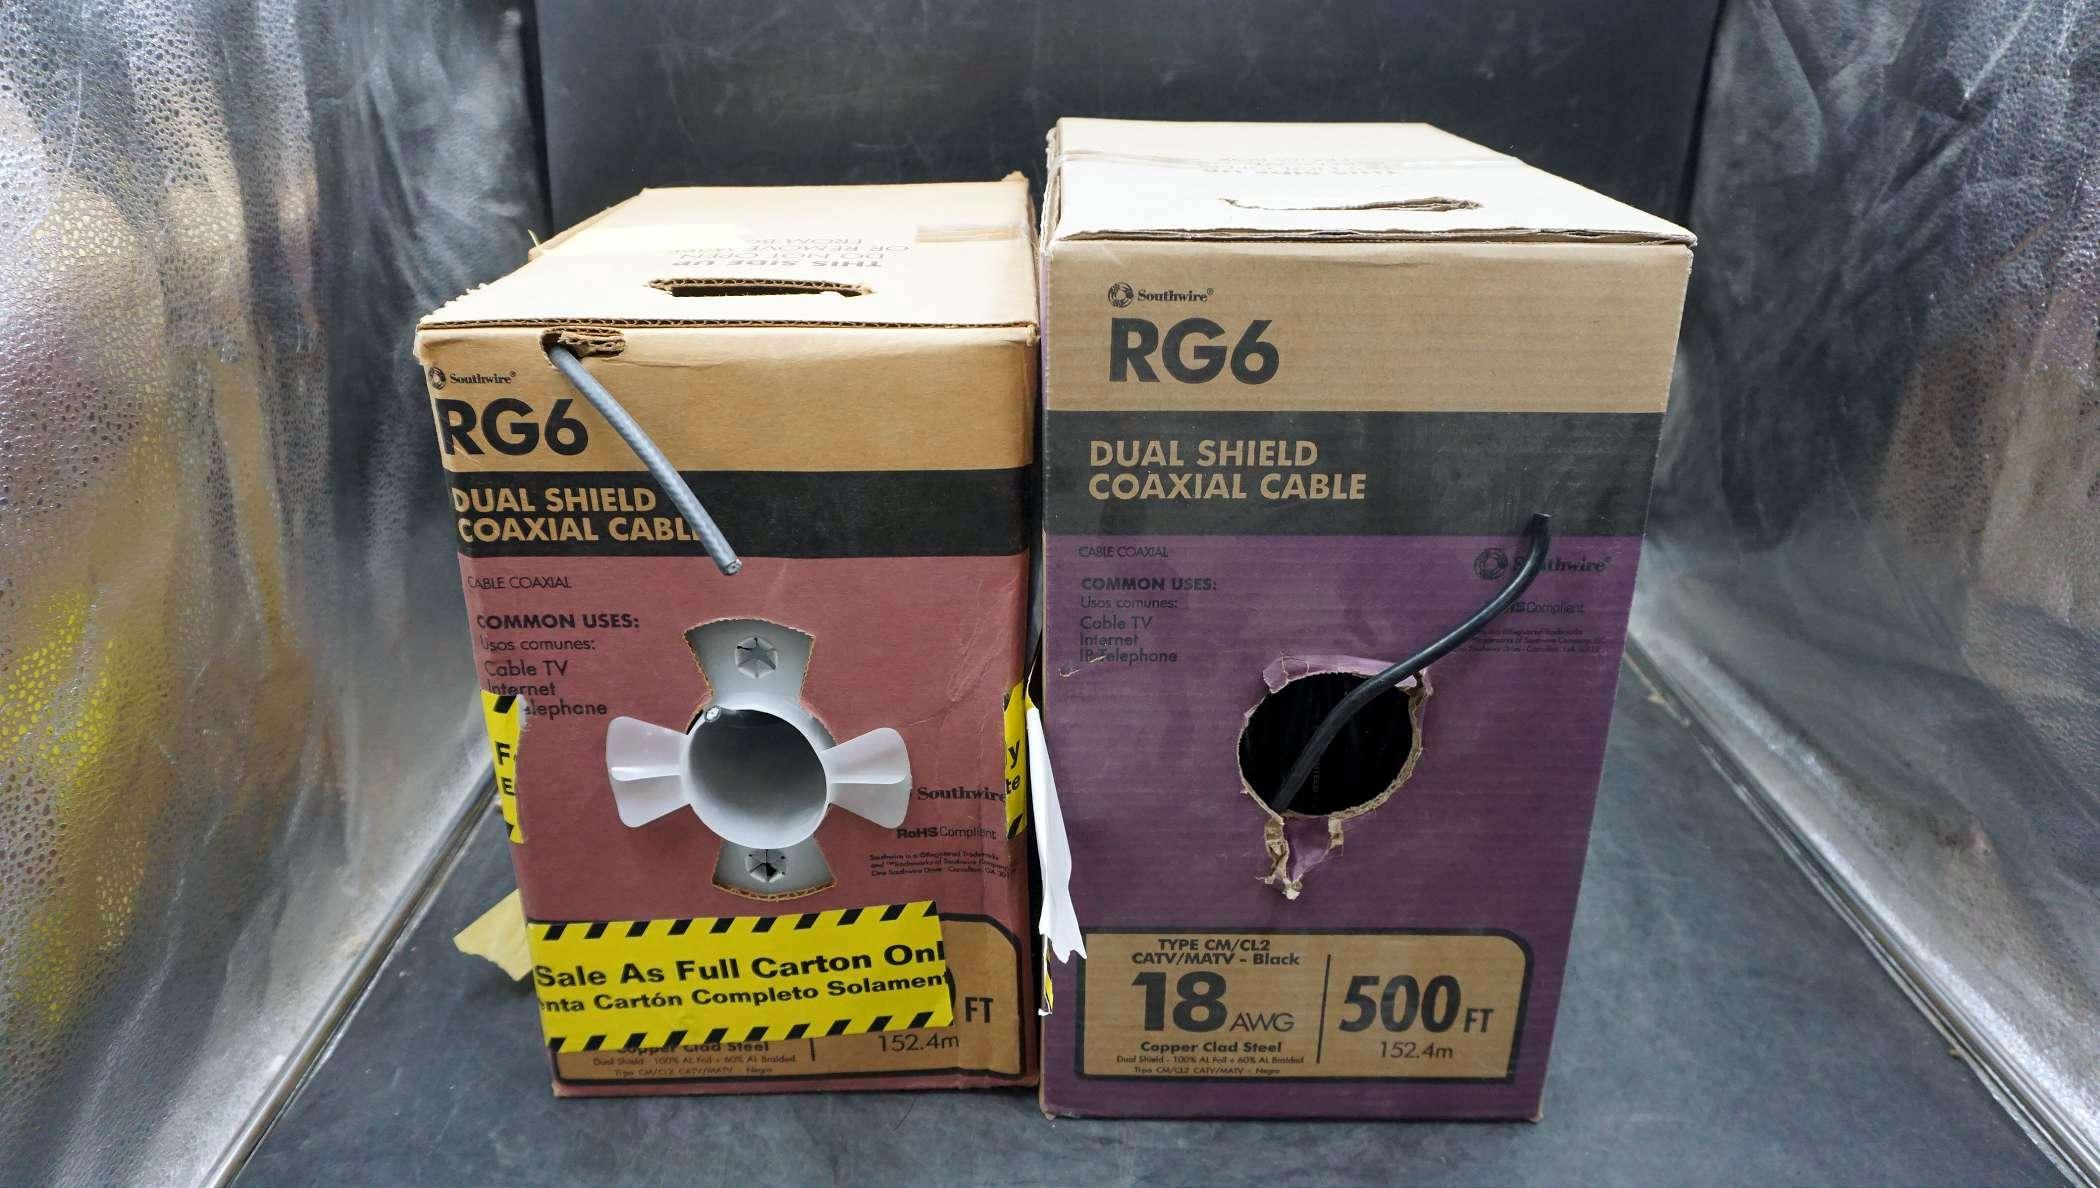 2 Boxes Of Rg6 Dual Shield Coaxial Cable